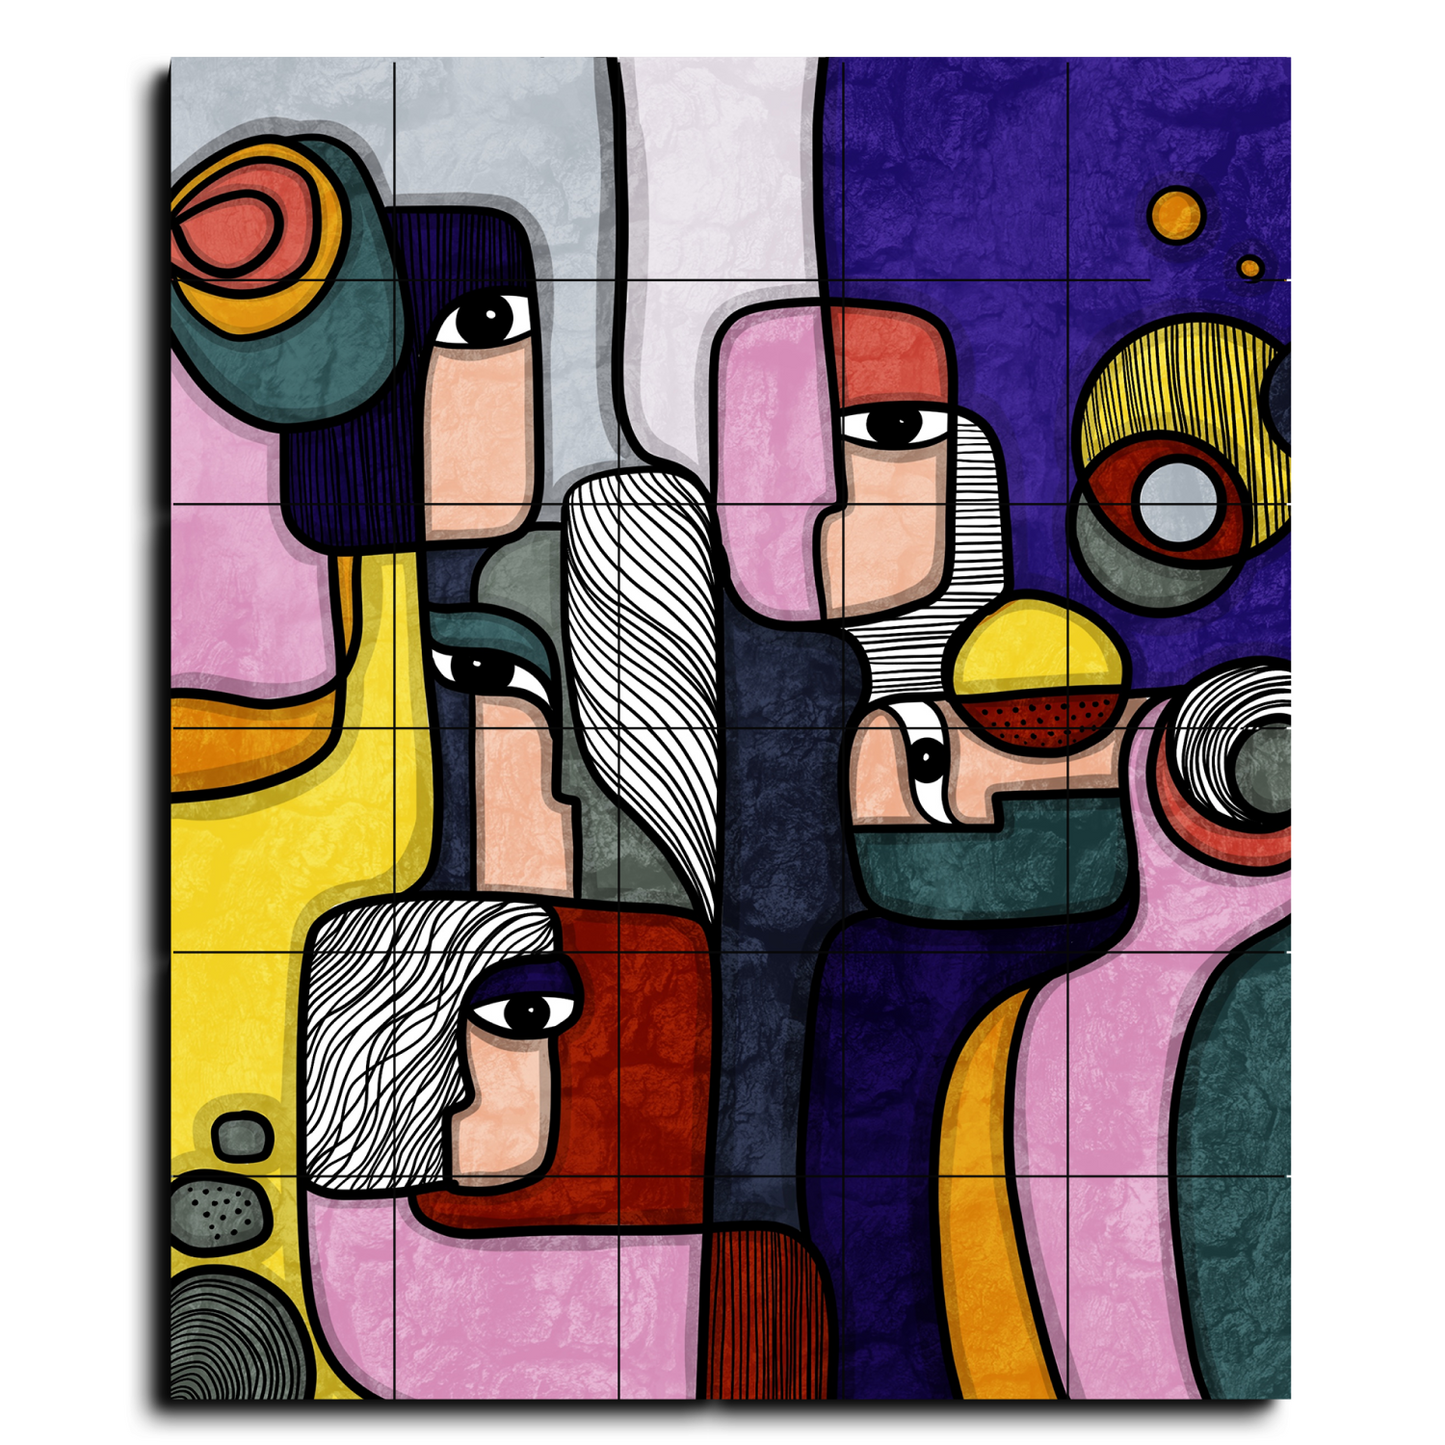 5 Faces Abstract Portrait Luxury Wall Tiles Set